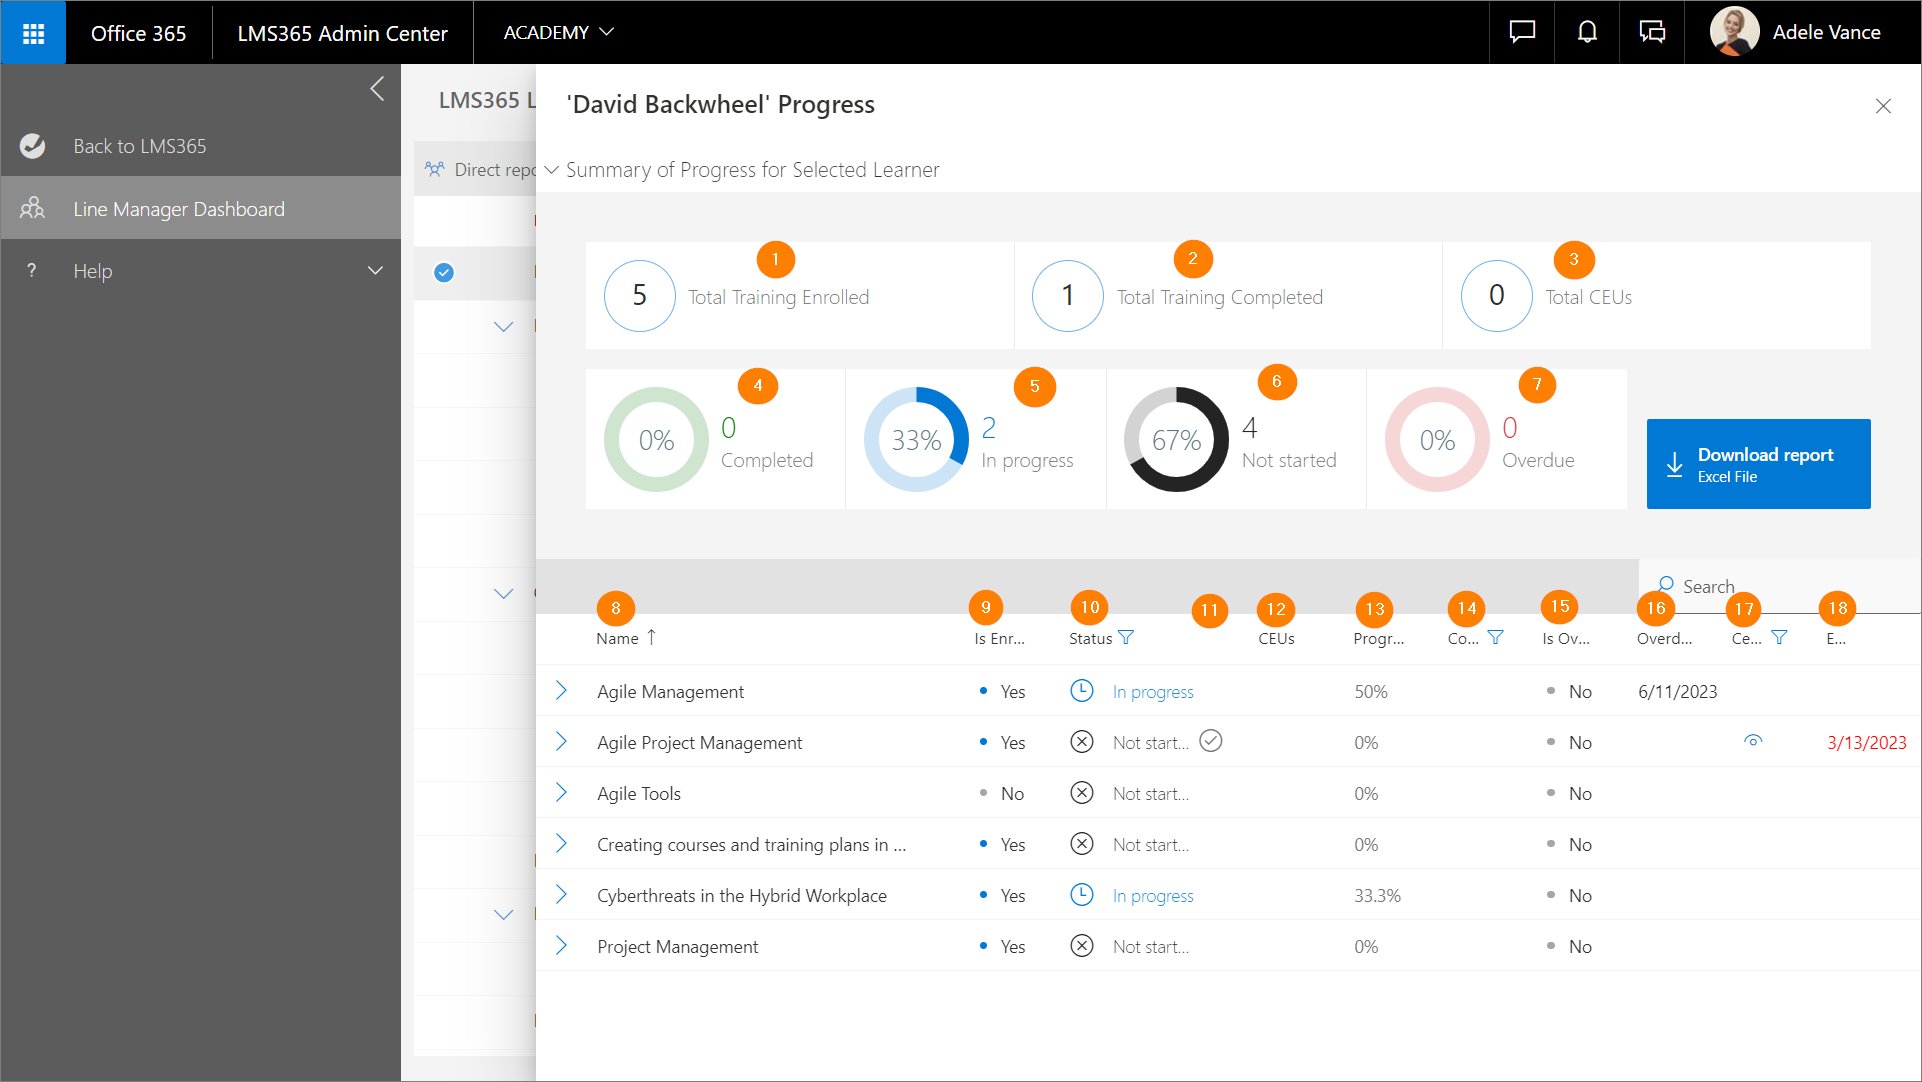 user_s_progress_in_Line_Manager_Dashboard